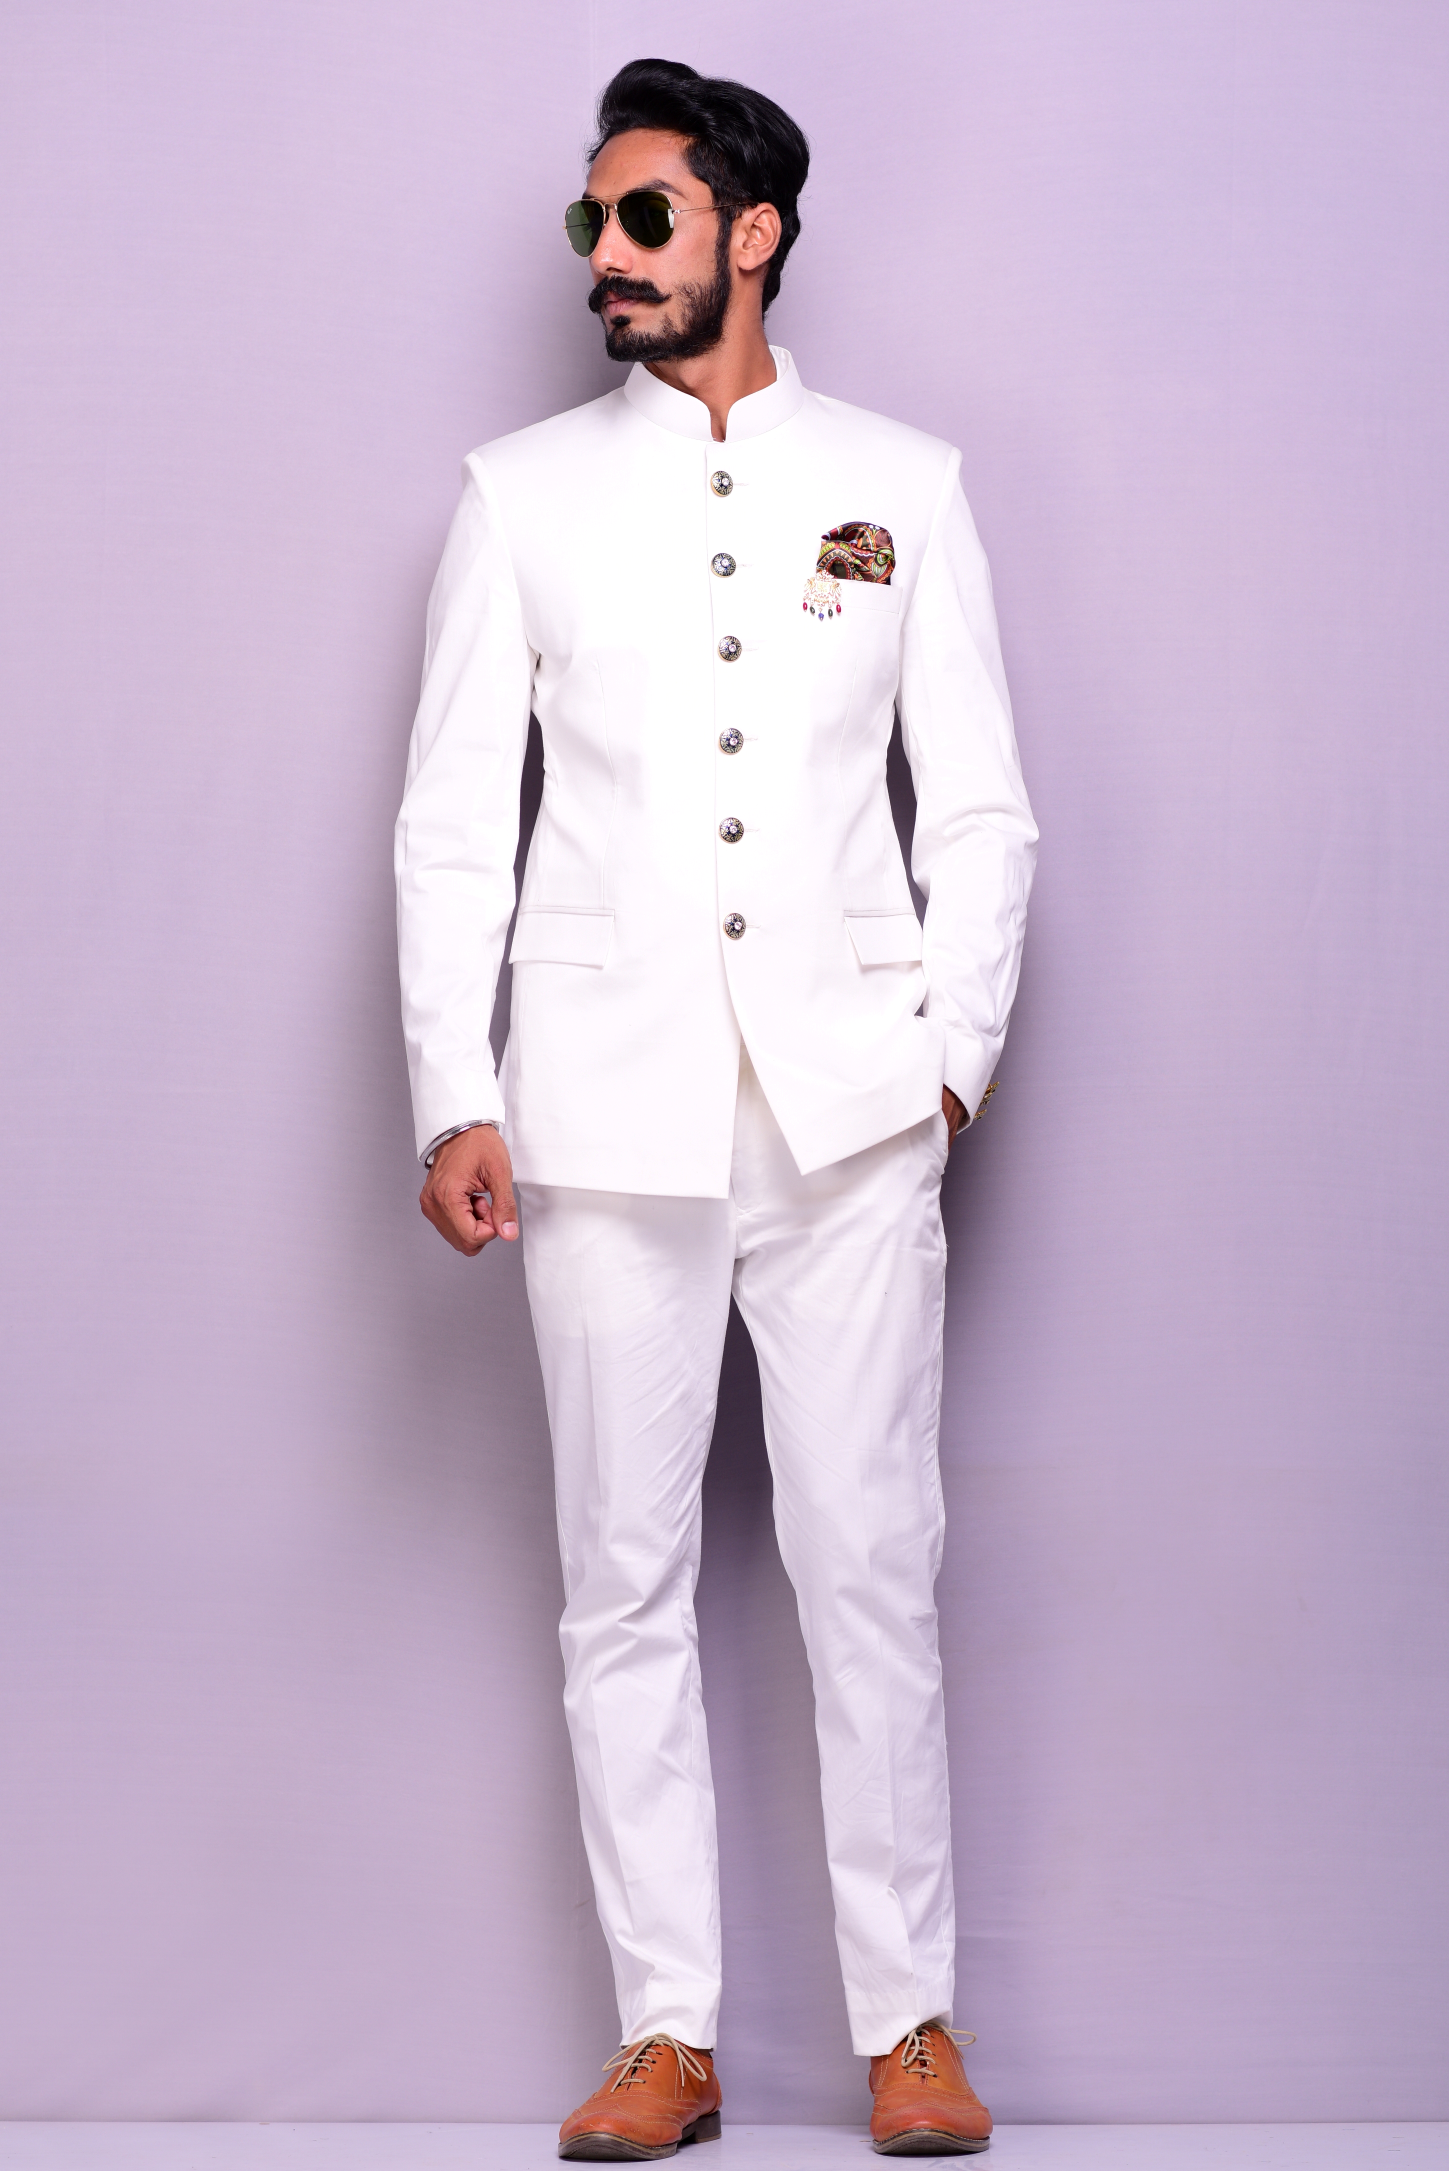 Classic White Jodhpuri Bandhgala Suit for Men |Terry Rayon|  Best Buy for Formal Events Parties Weddings | Elite Elegant Dignified Appearance